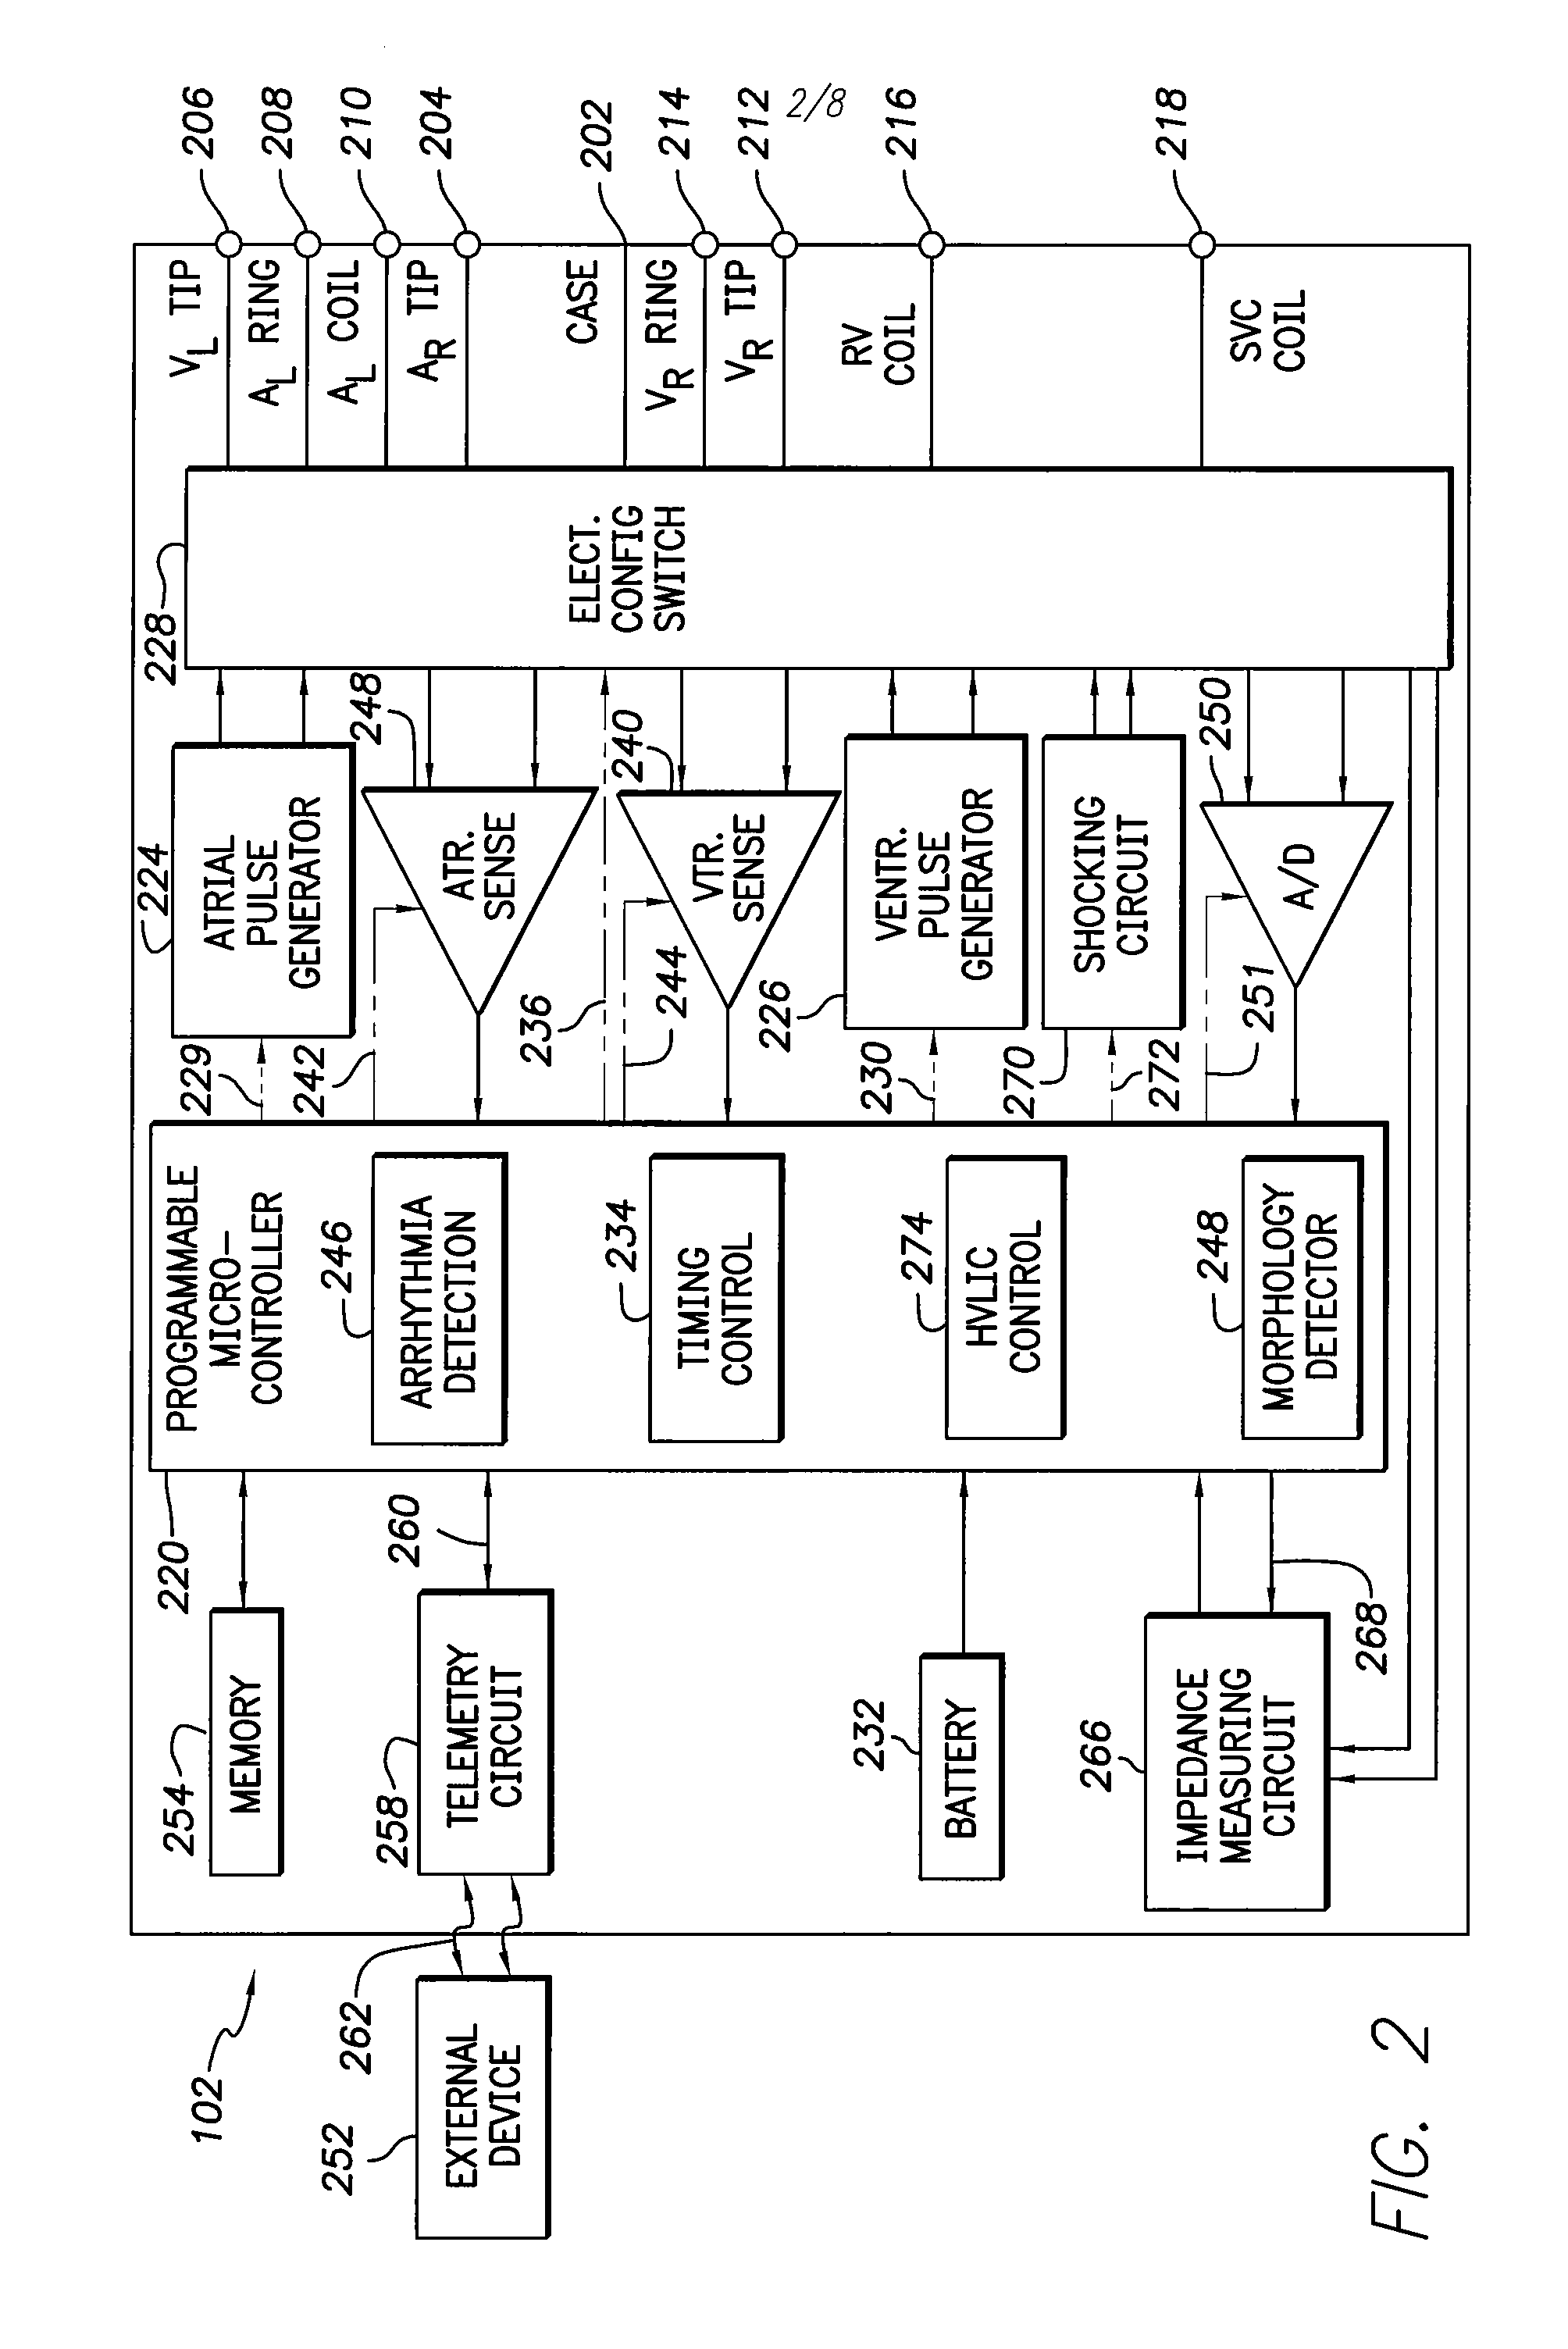 System and method for reducing pain in a high-voltage lead impedance check procedure using DC voltage or current in an implantable medical device